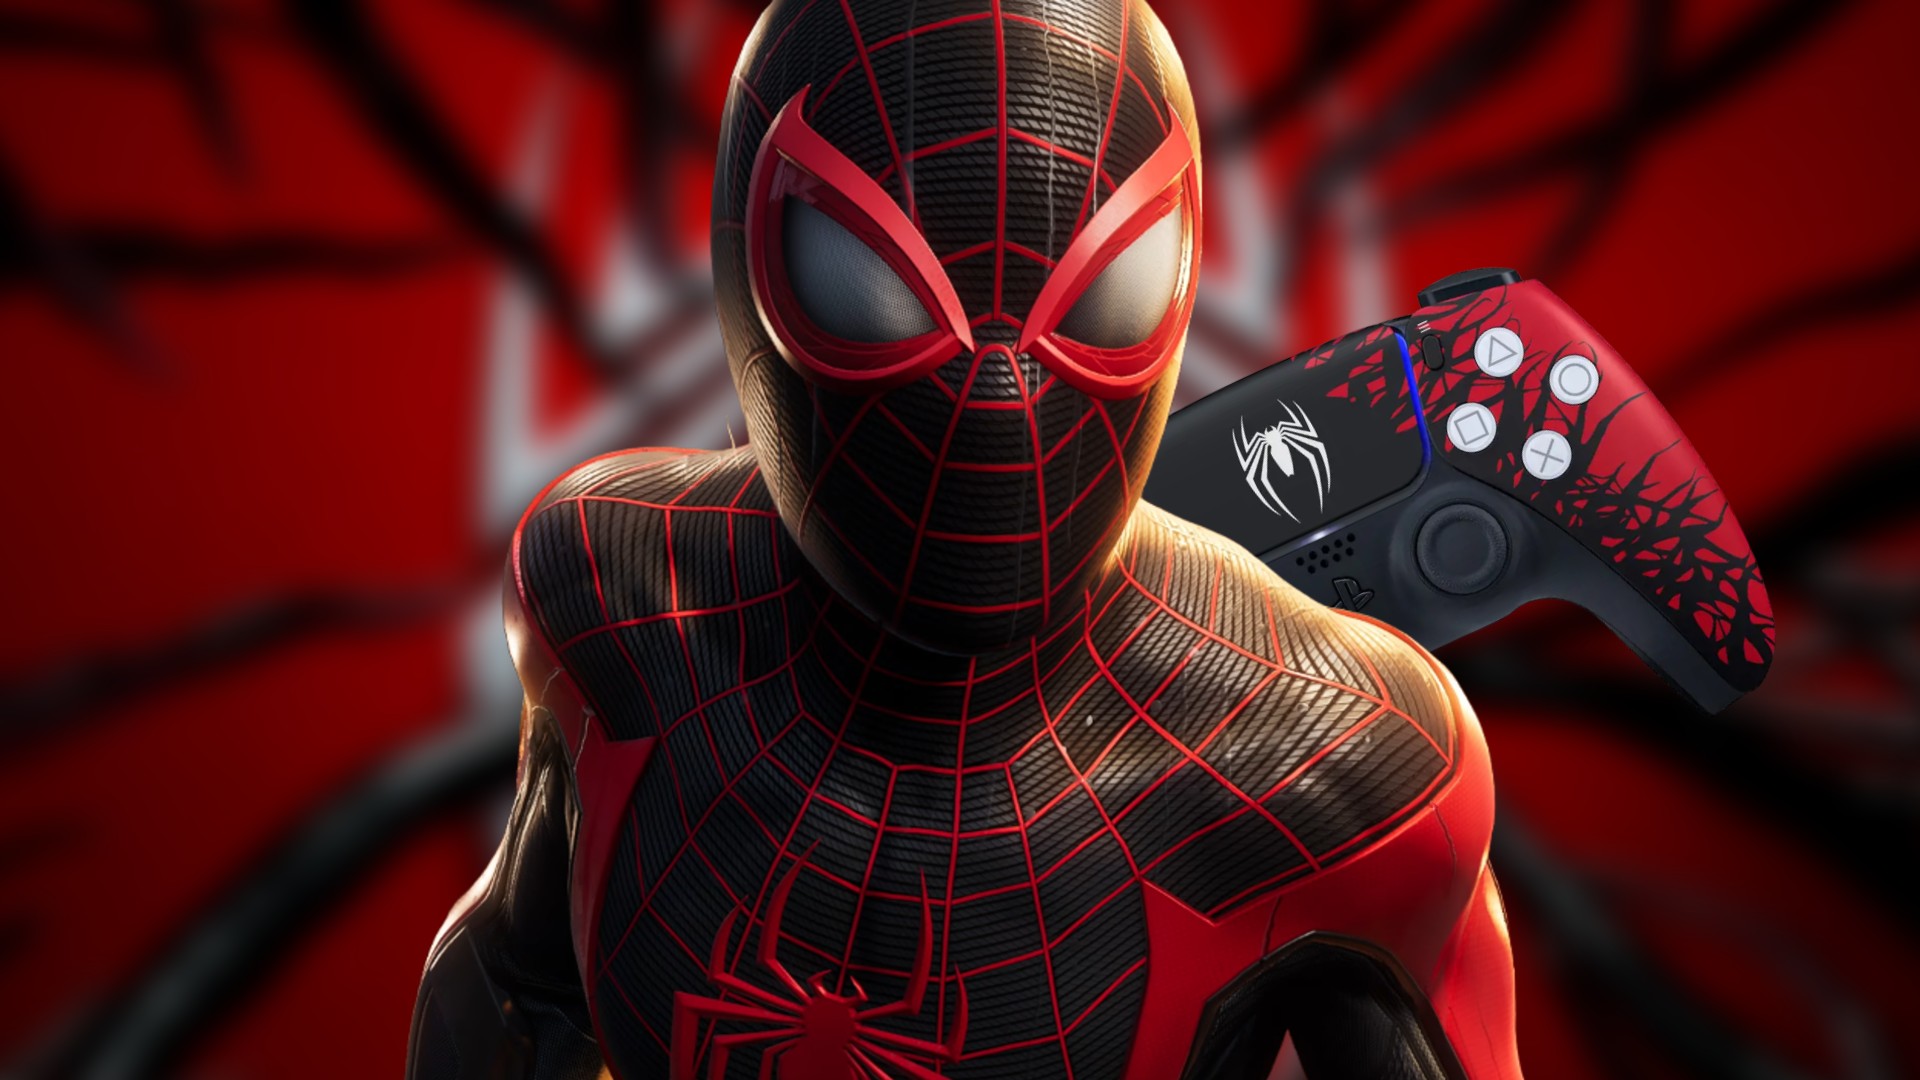 Where To Buy The Spider-Man 2 PS5 DualSense Controller - Cultured Vultures